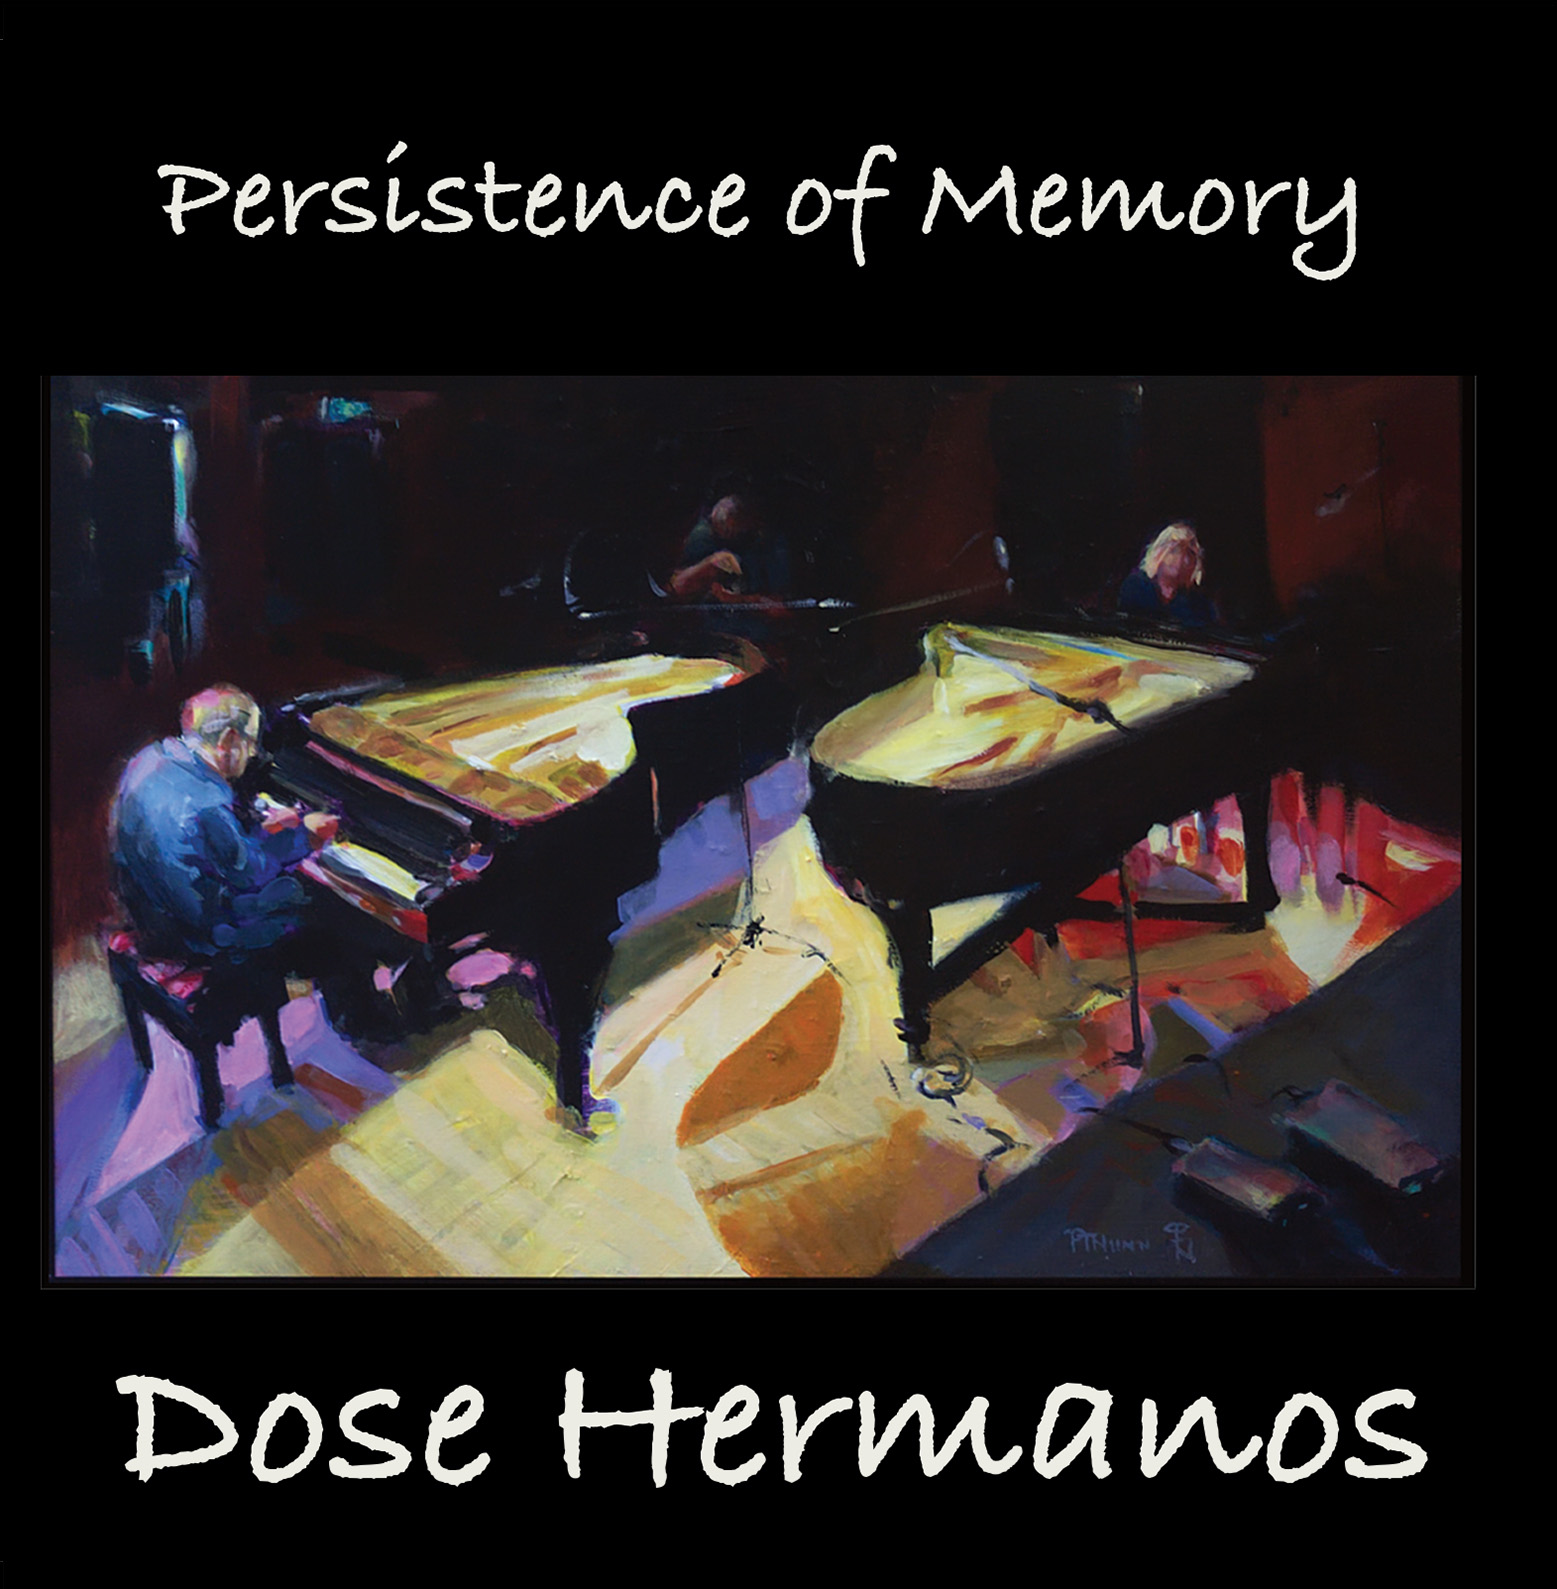 Dose Hermanos' "Persistence of Memory" Available Now